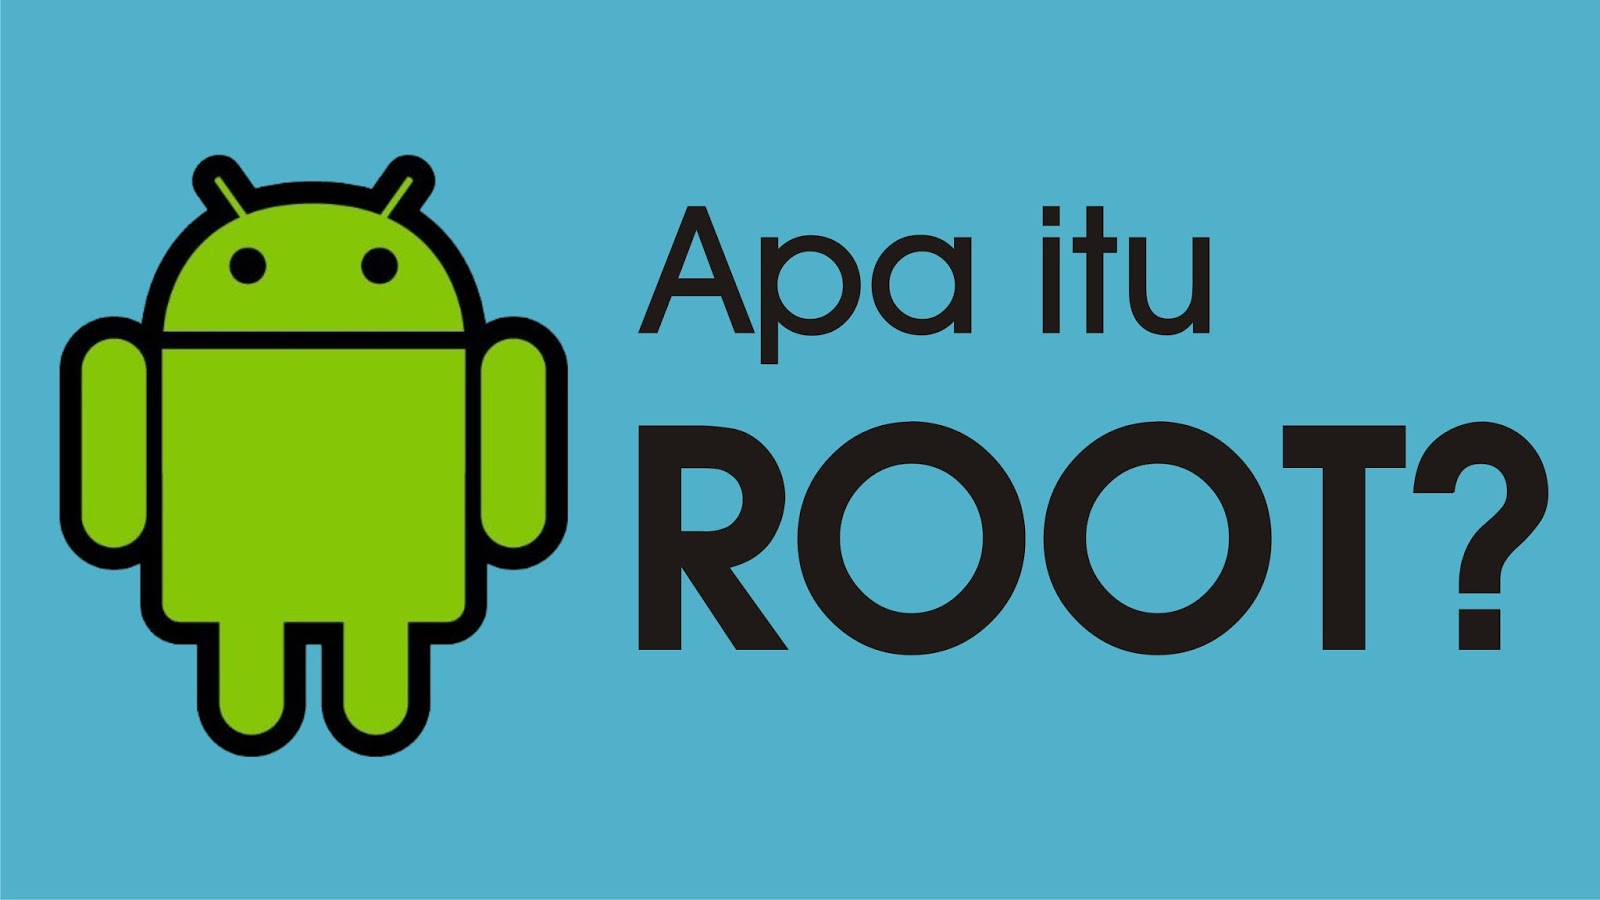 I root com. Android root. Root me. Proot. Super su logo Android root.